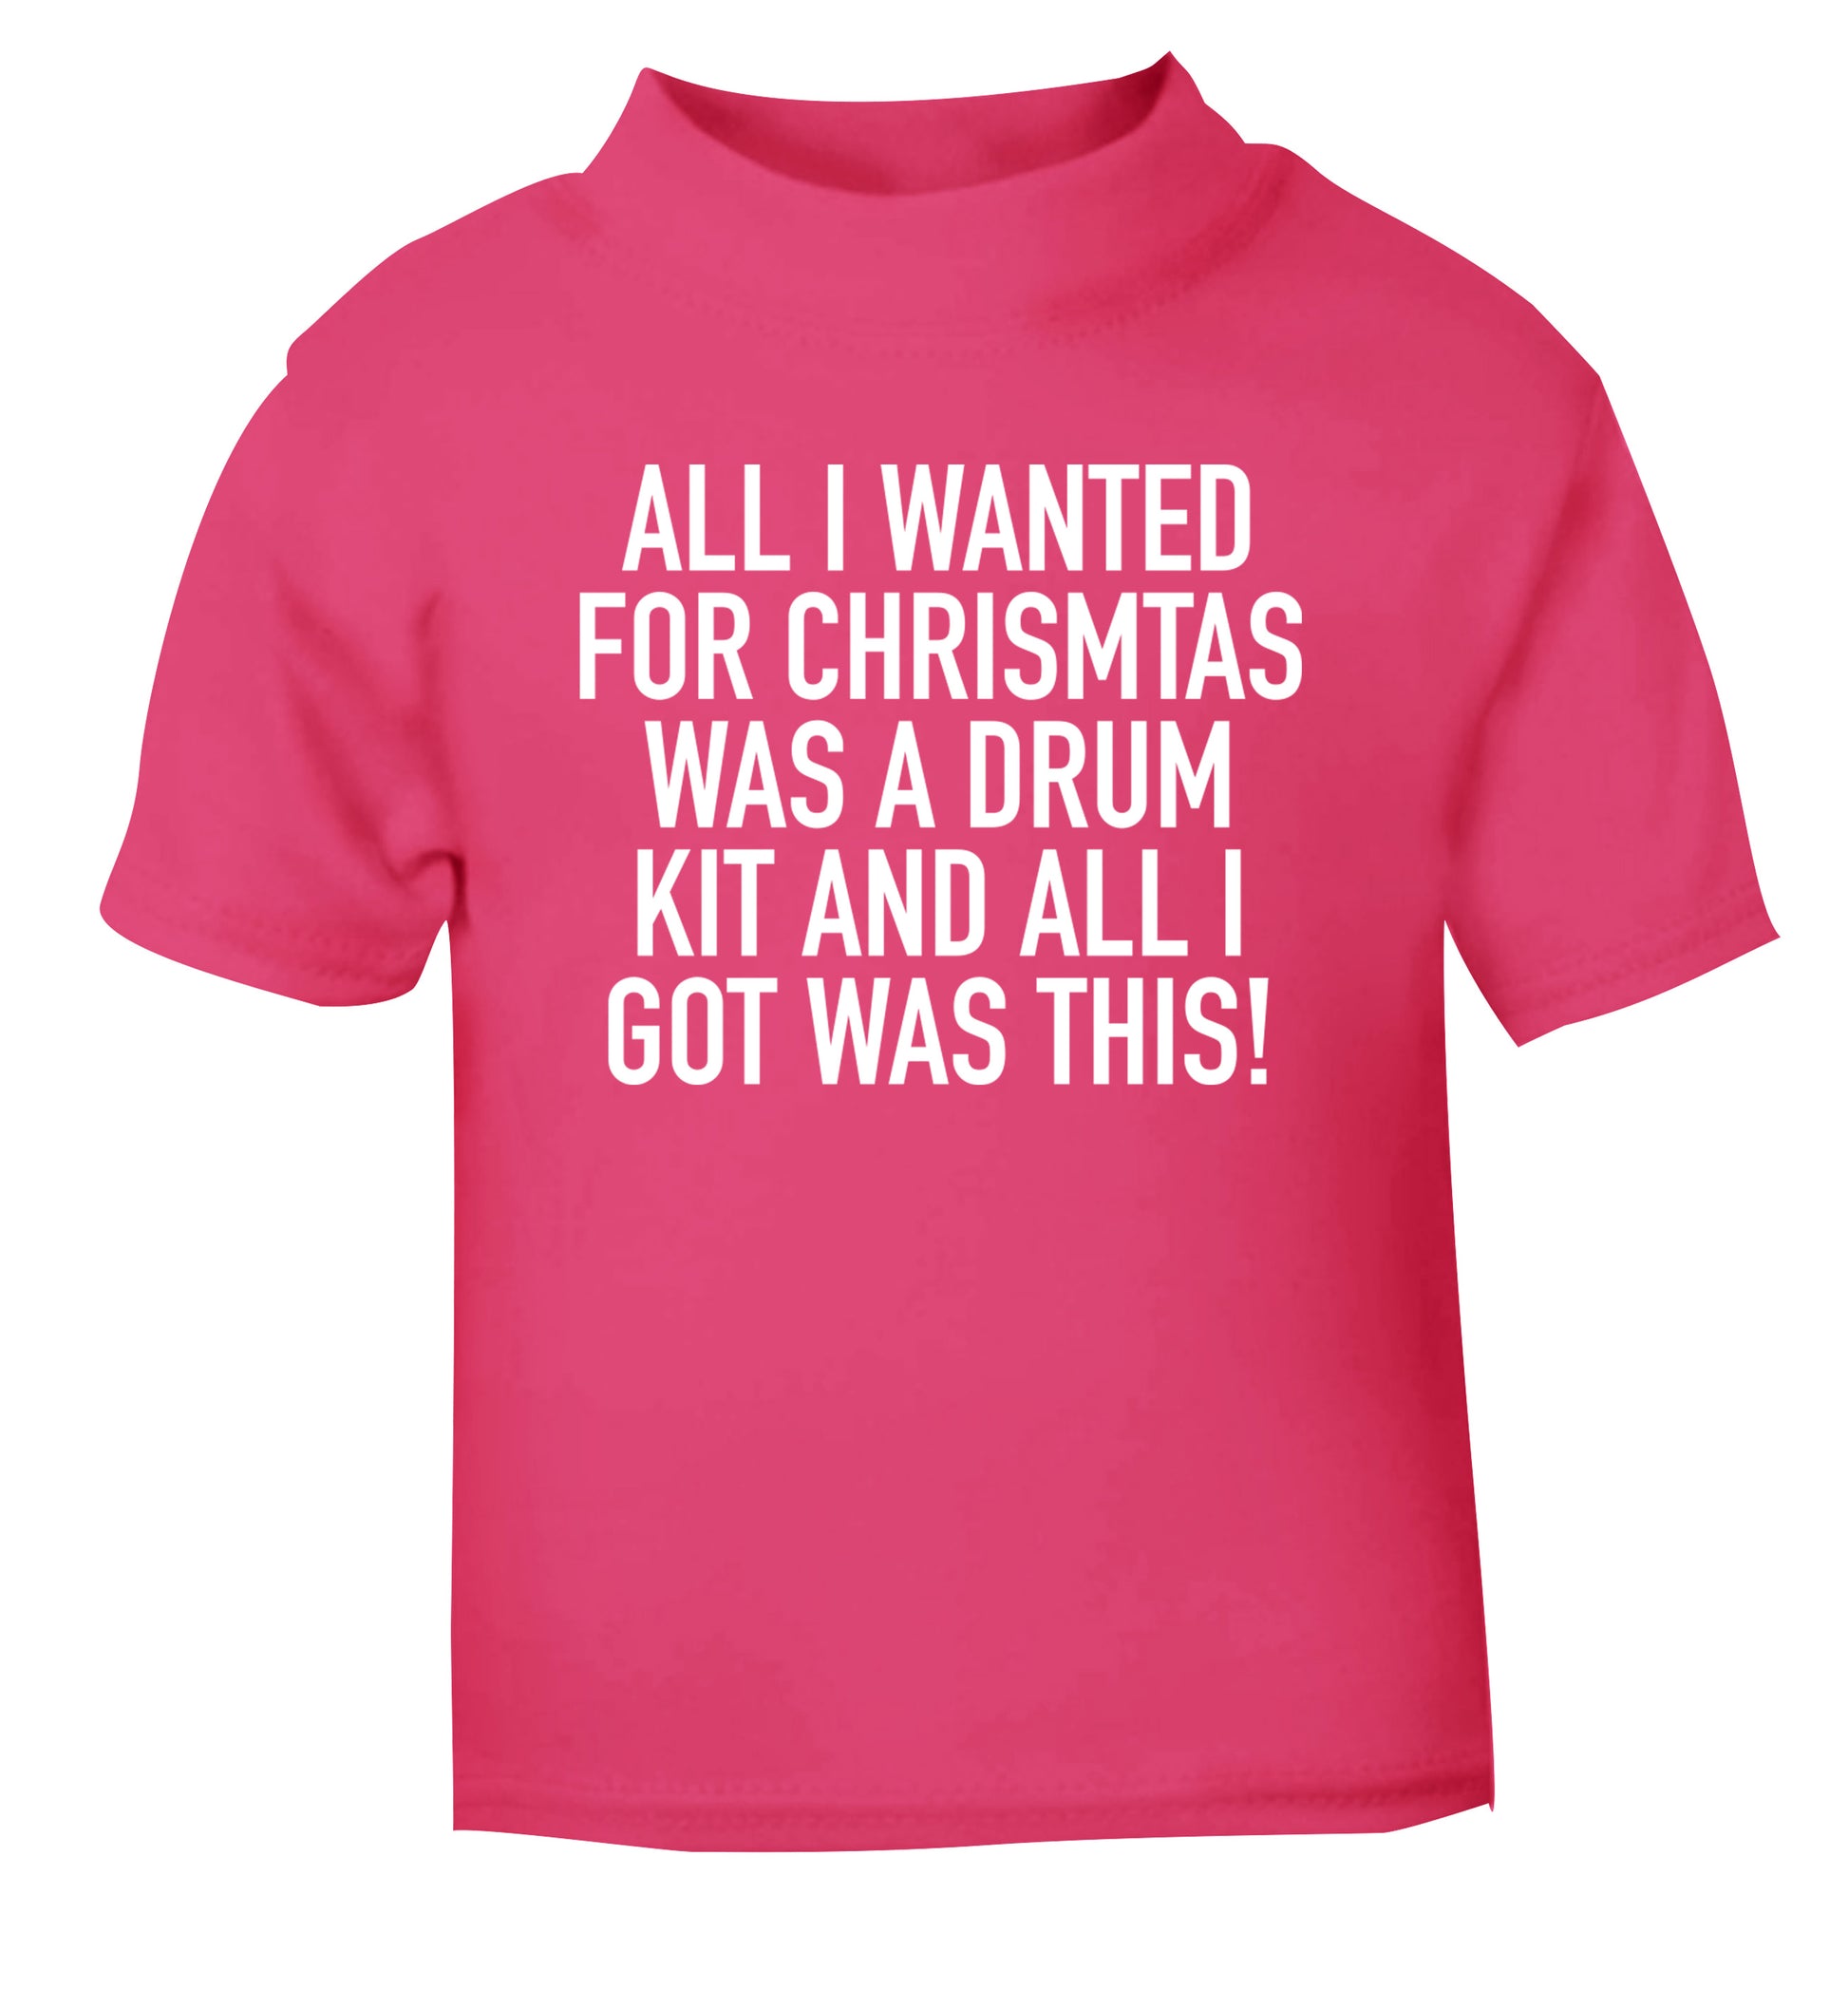 All I wanted for Christmas was a drum kit and all I got was this! pink Baby Toddler Tshirt 2 Years